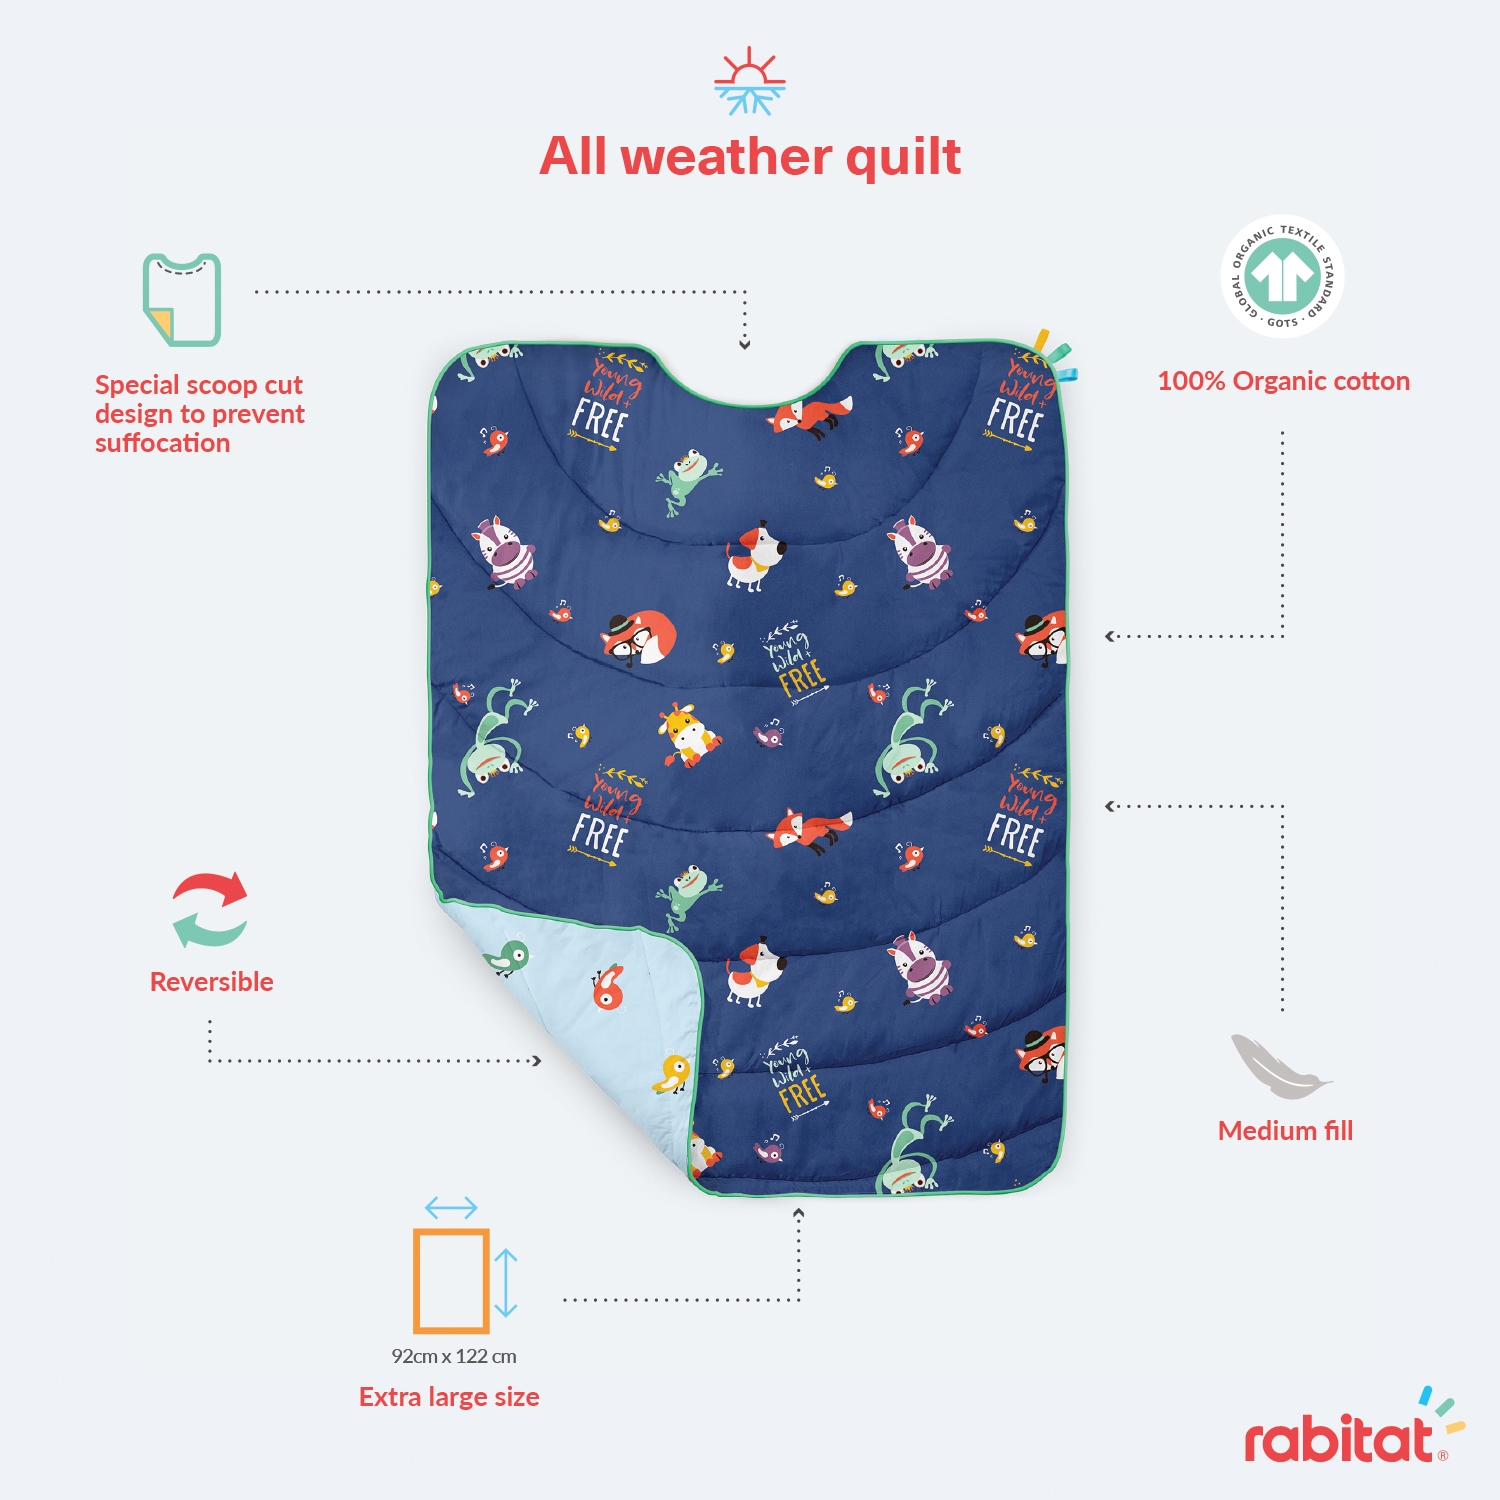 Mothercare | Rabitat 100% Organic Cotton All Weather Quilt - Young + Wild + Free 4